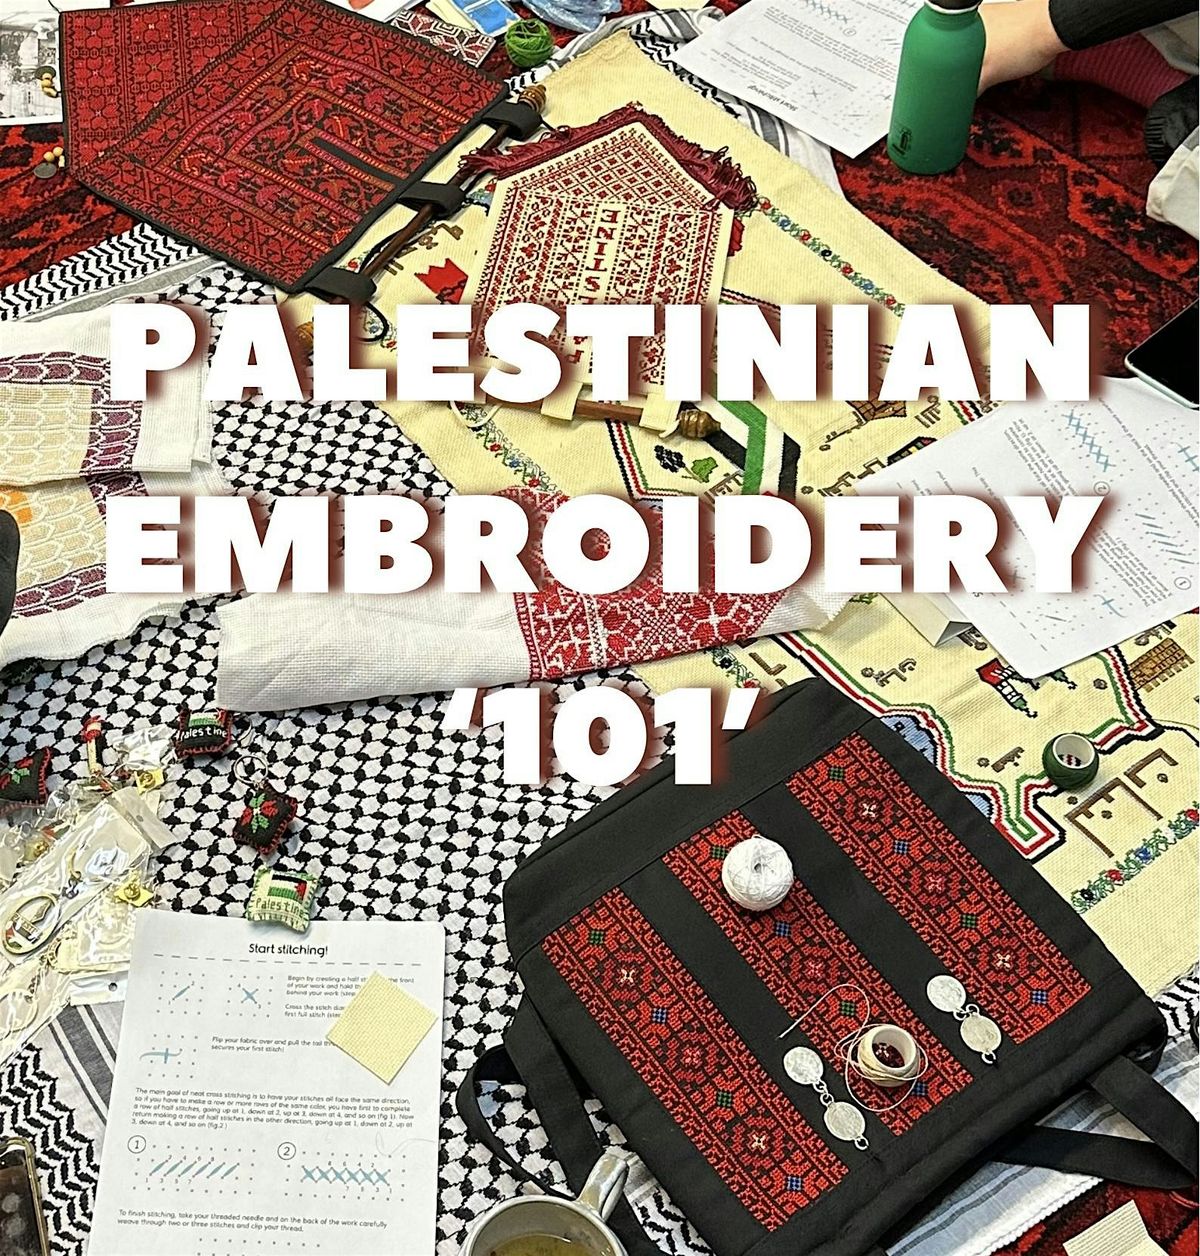 Juno Crafts x Palestinian Embroidery 101